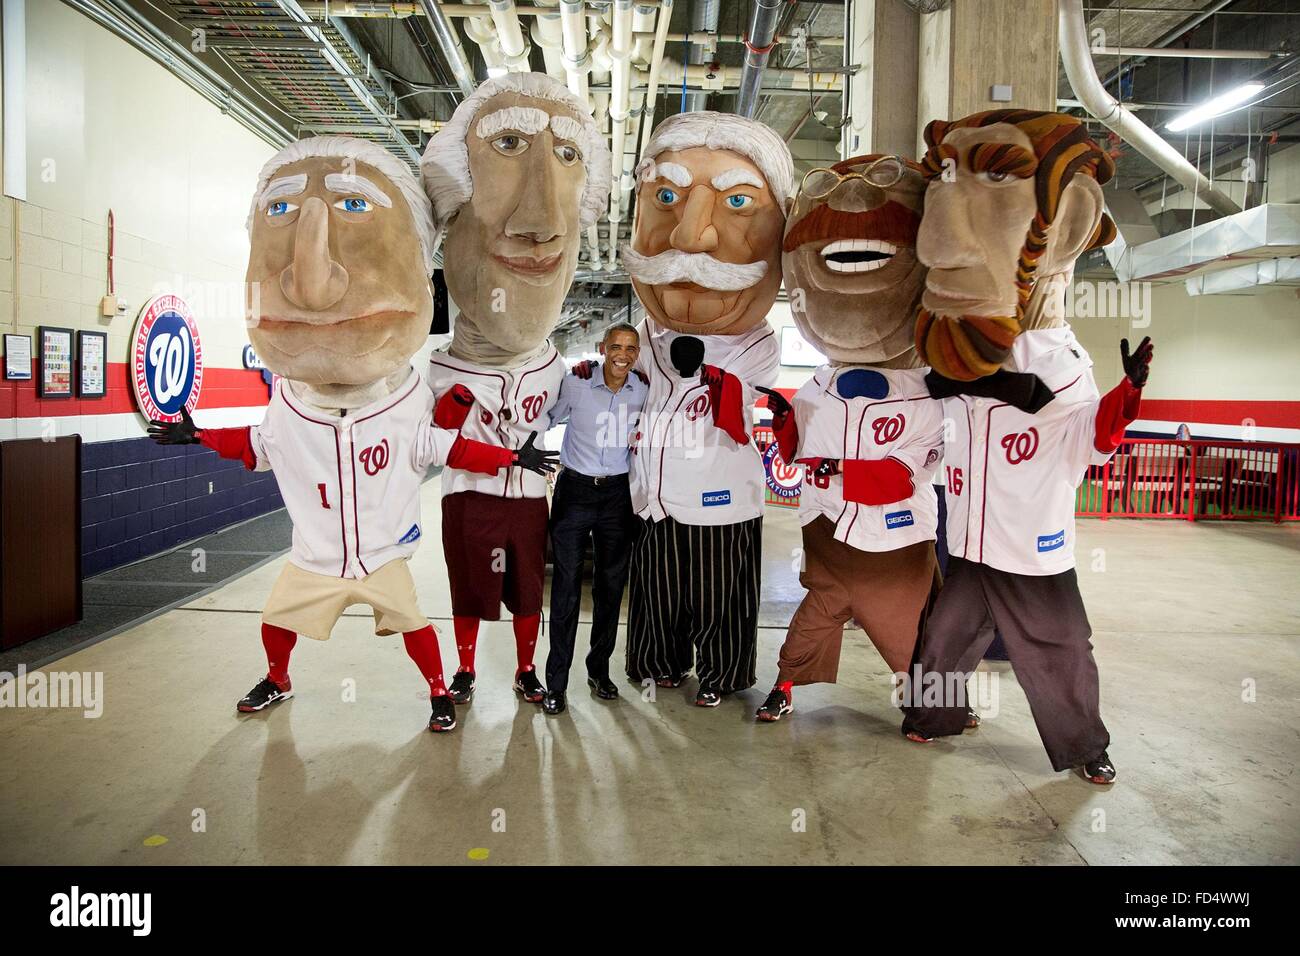 U.S. President Barack Obama poses with the Racing Presidents, mascots for the Washington Nationals baseball team at Nationals Park June 11, 2015 in Washington, DC. Stock Photo